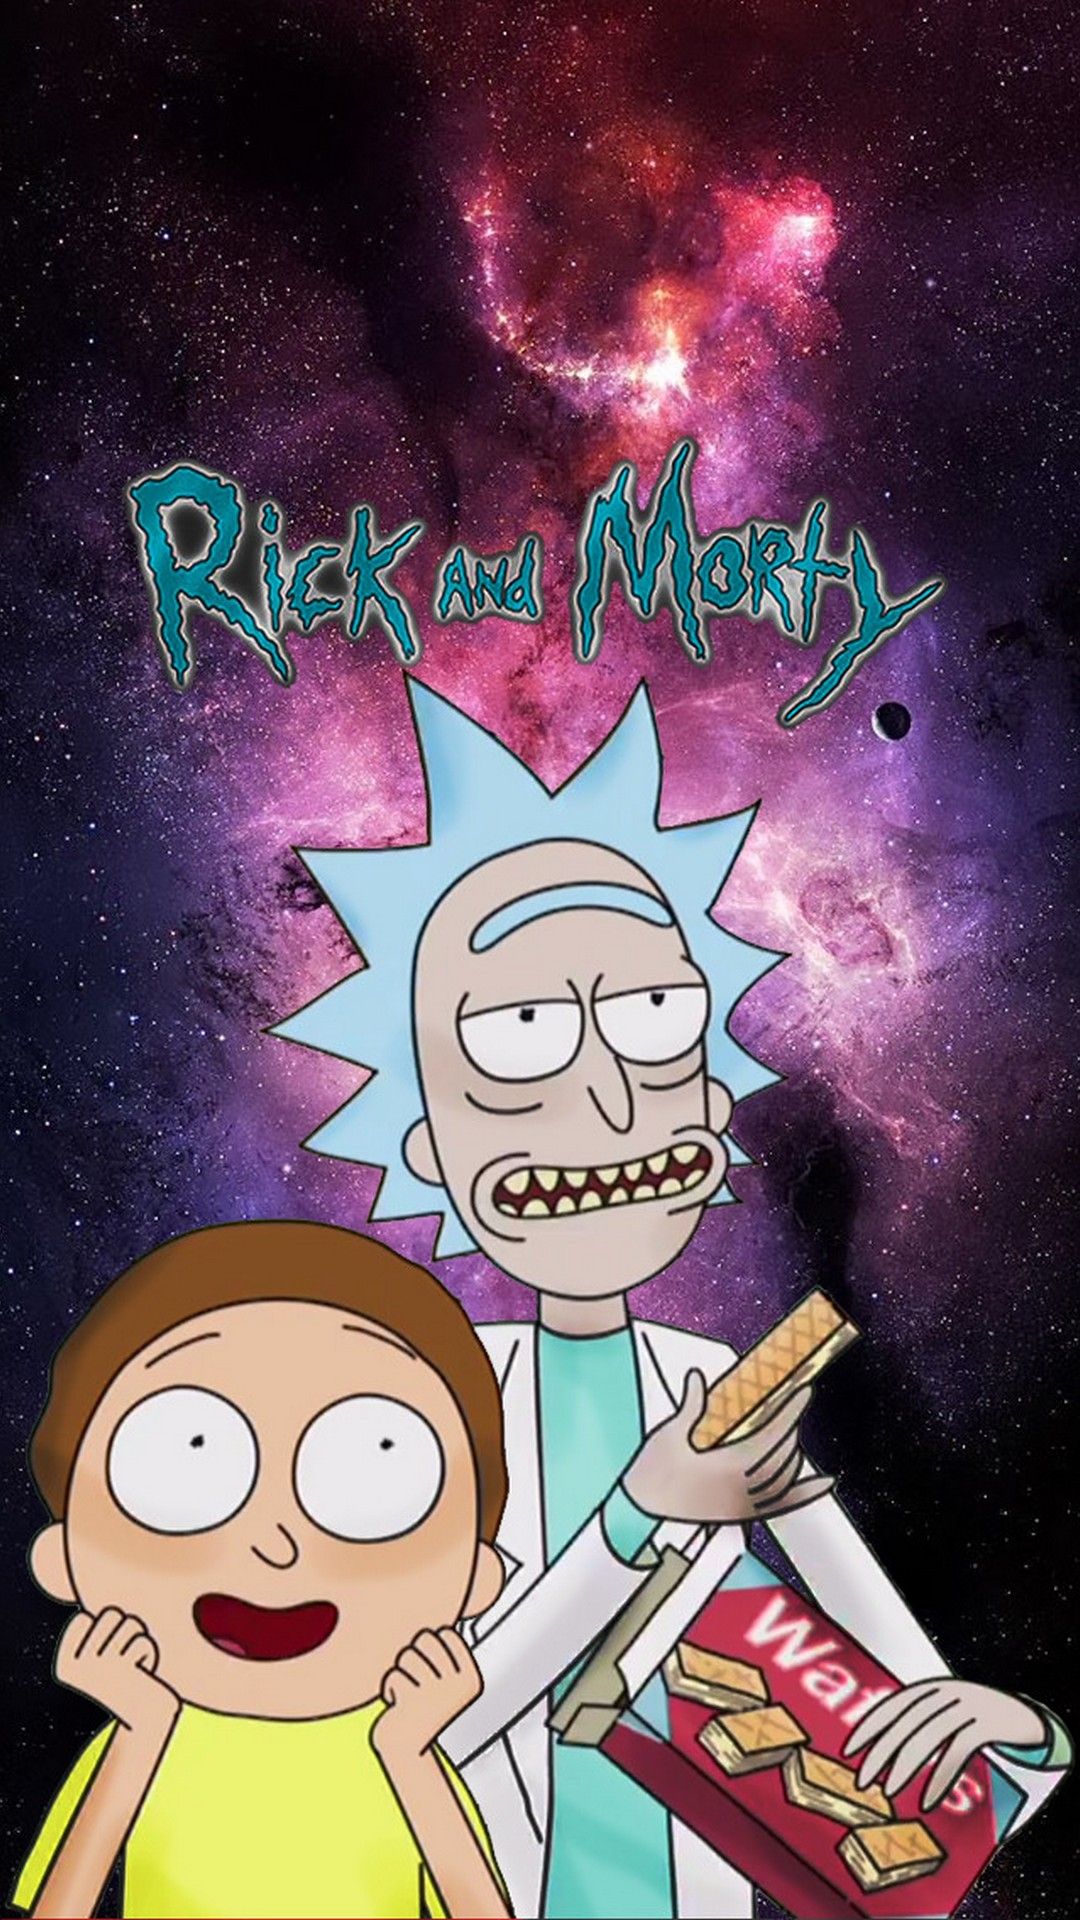 1080x1920 Rick and Morty iPhone Wallpapers on WallpaperDog.